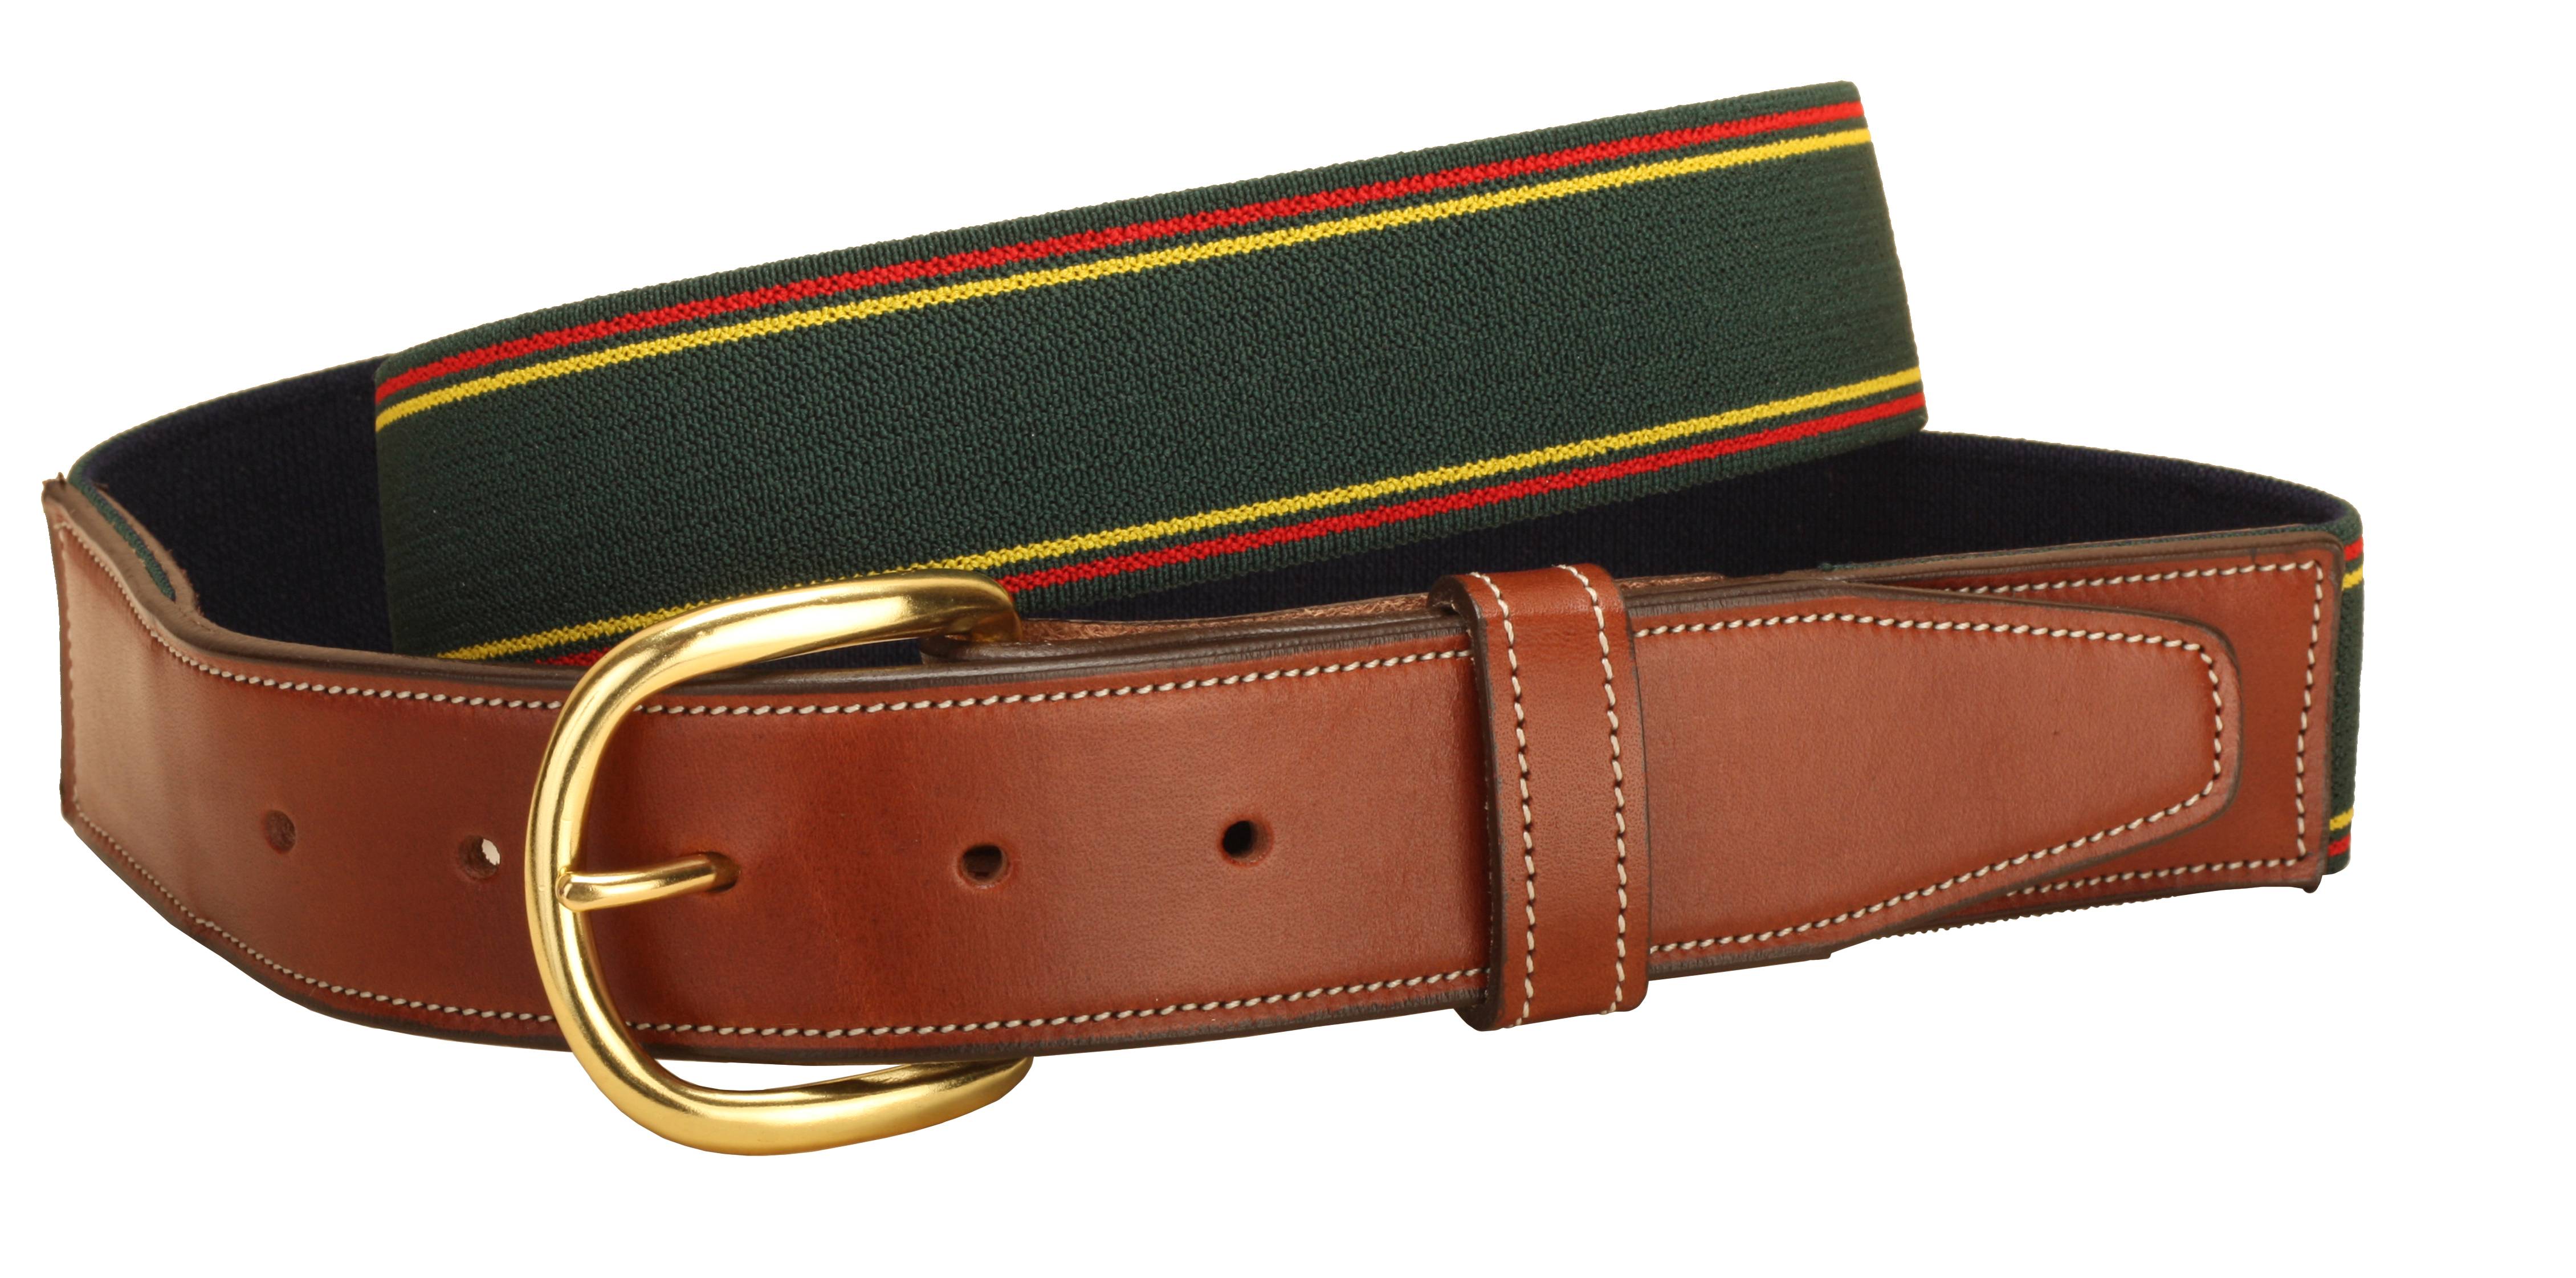 Tory Leather Elastic Belt With Leather Billets